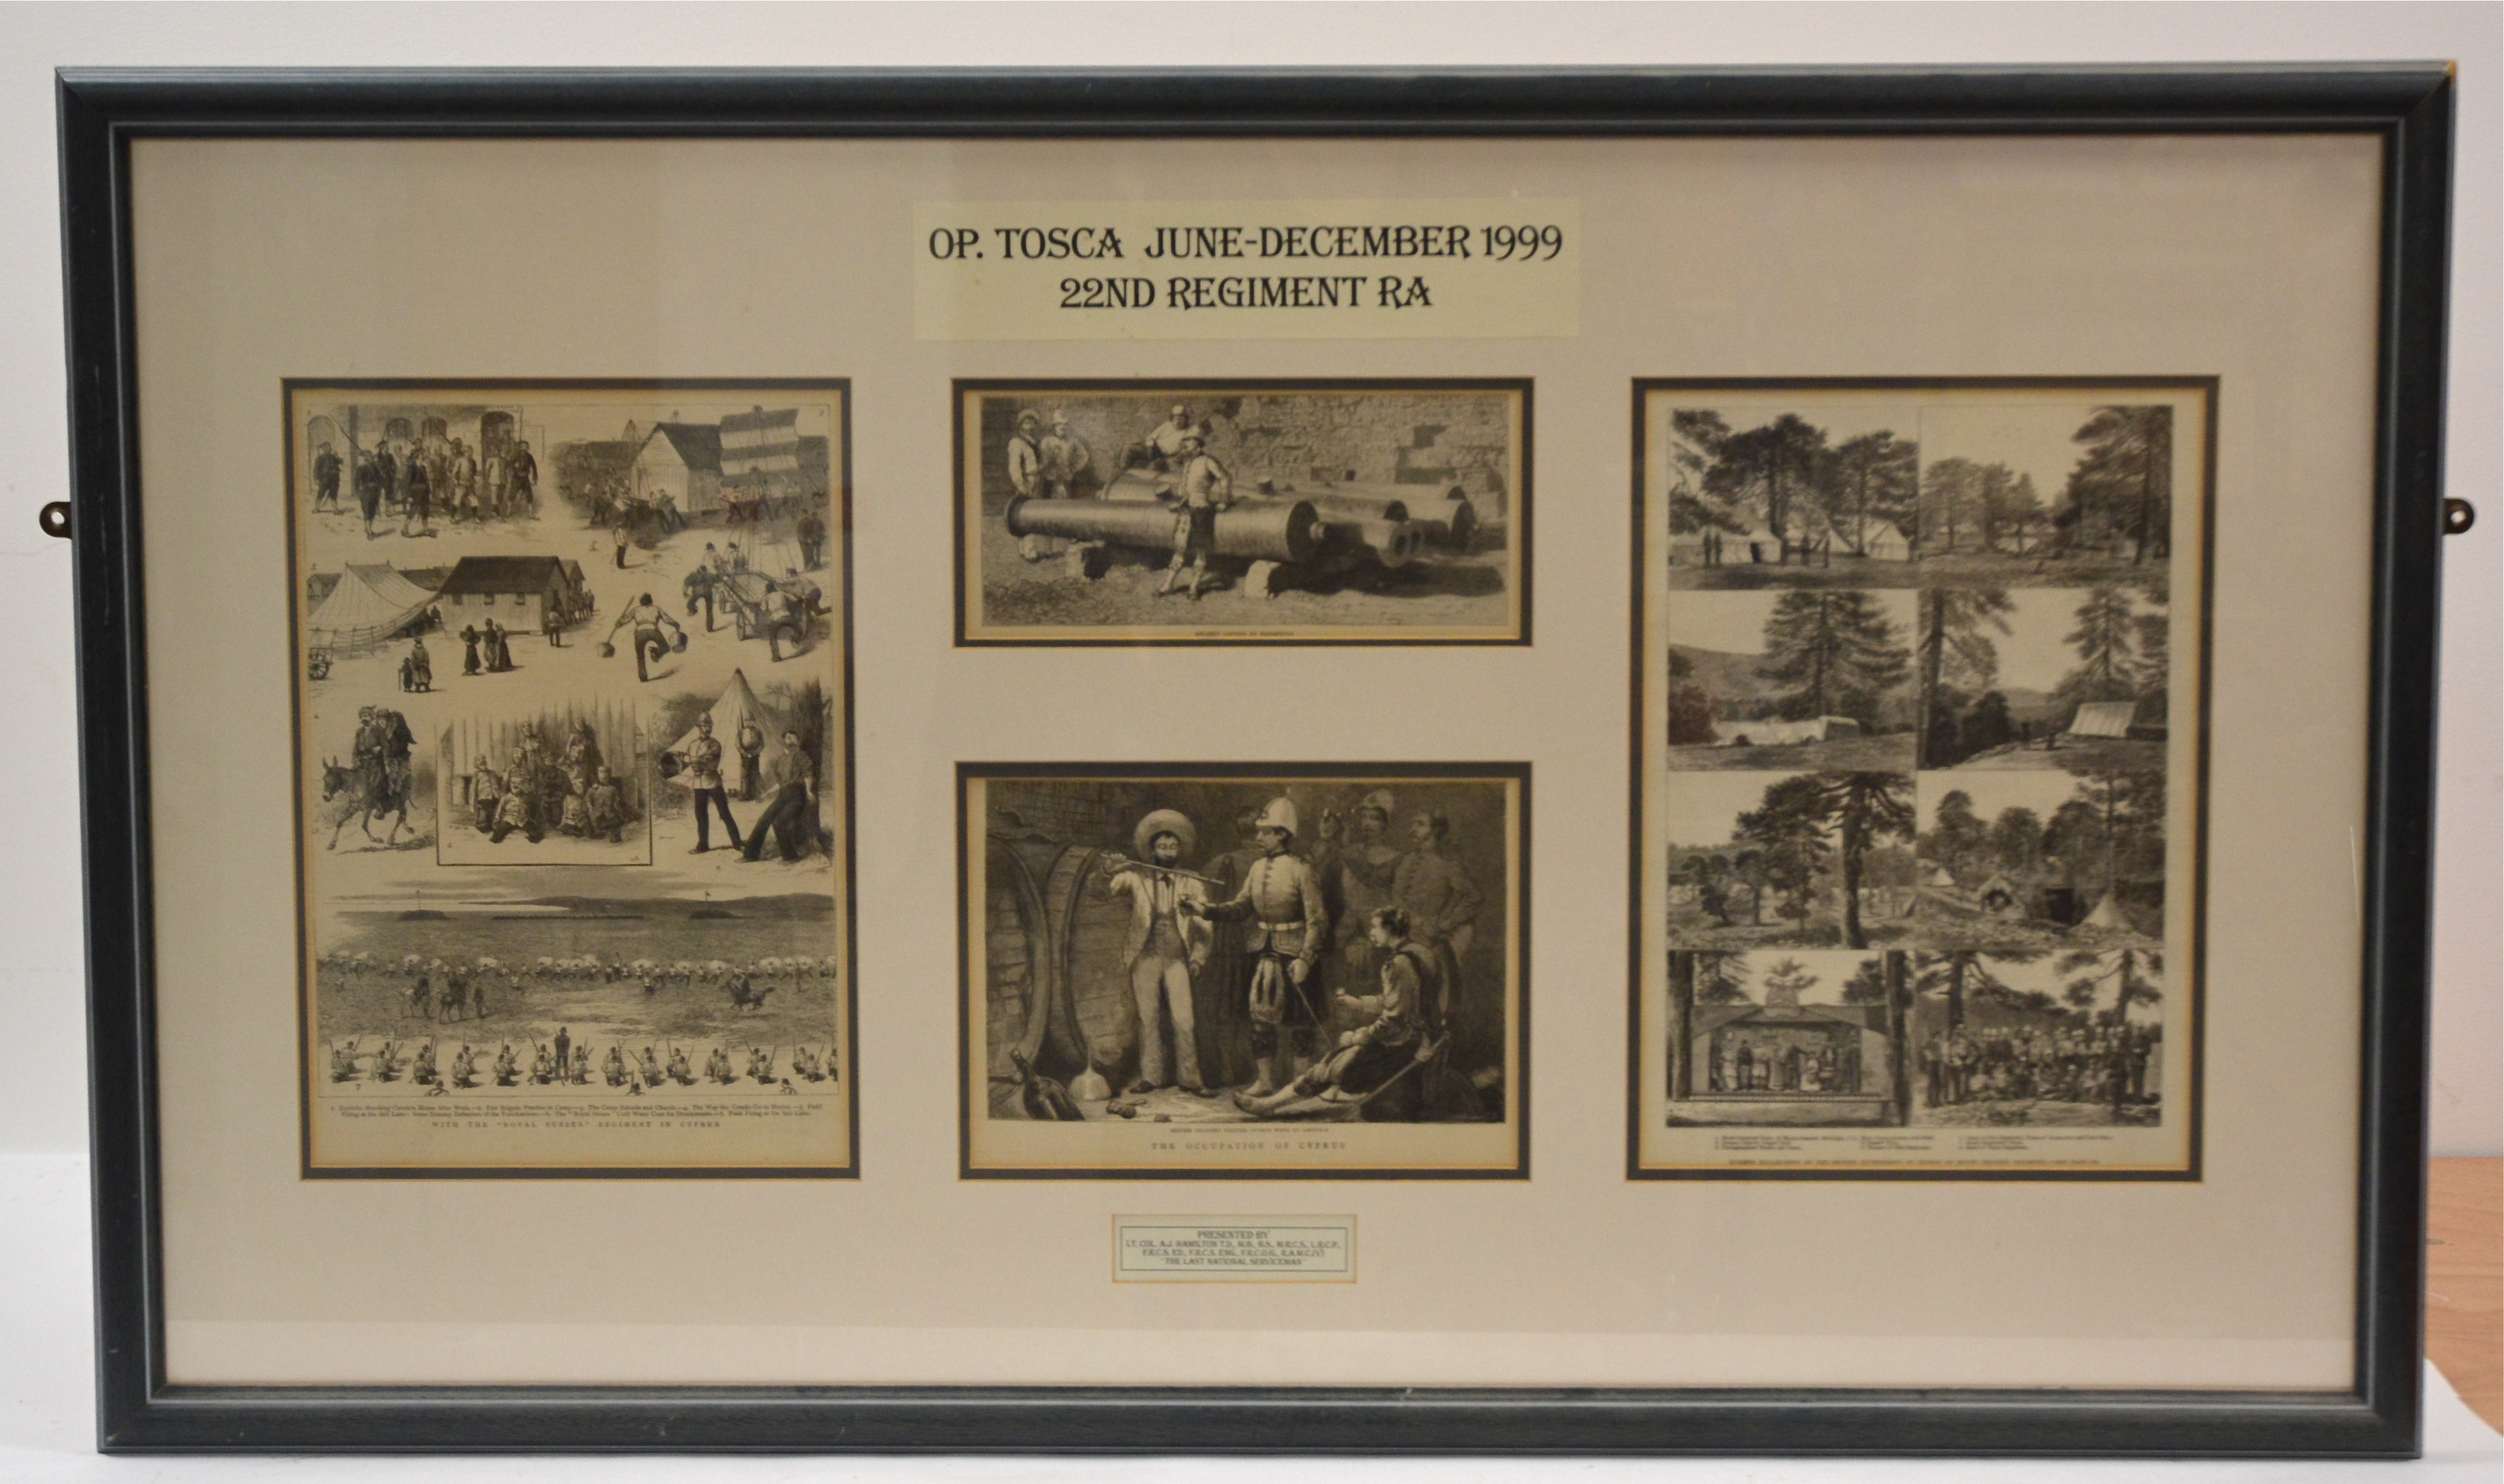 Commemorative set of four engravings, Operation Tosca and 22nd Regiment of Royal Artillery, 53cm x